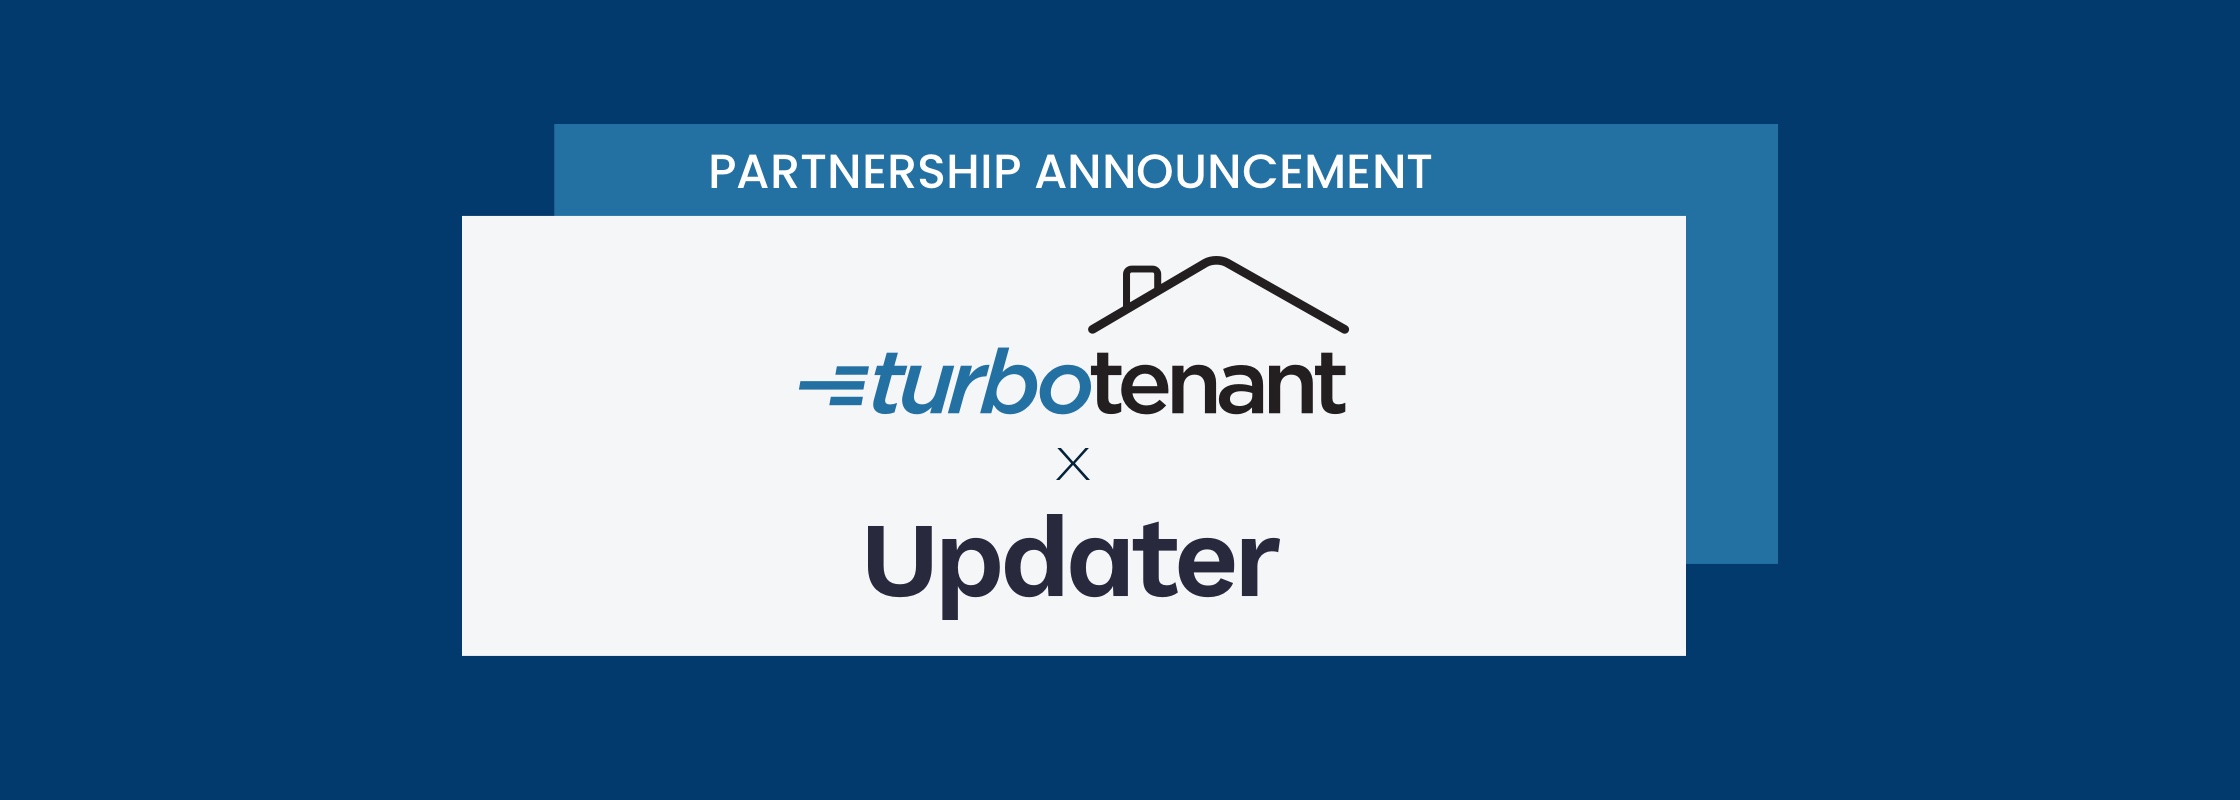 Partnership Announcement: TurboTenant and Updater